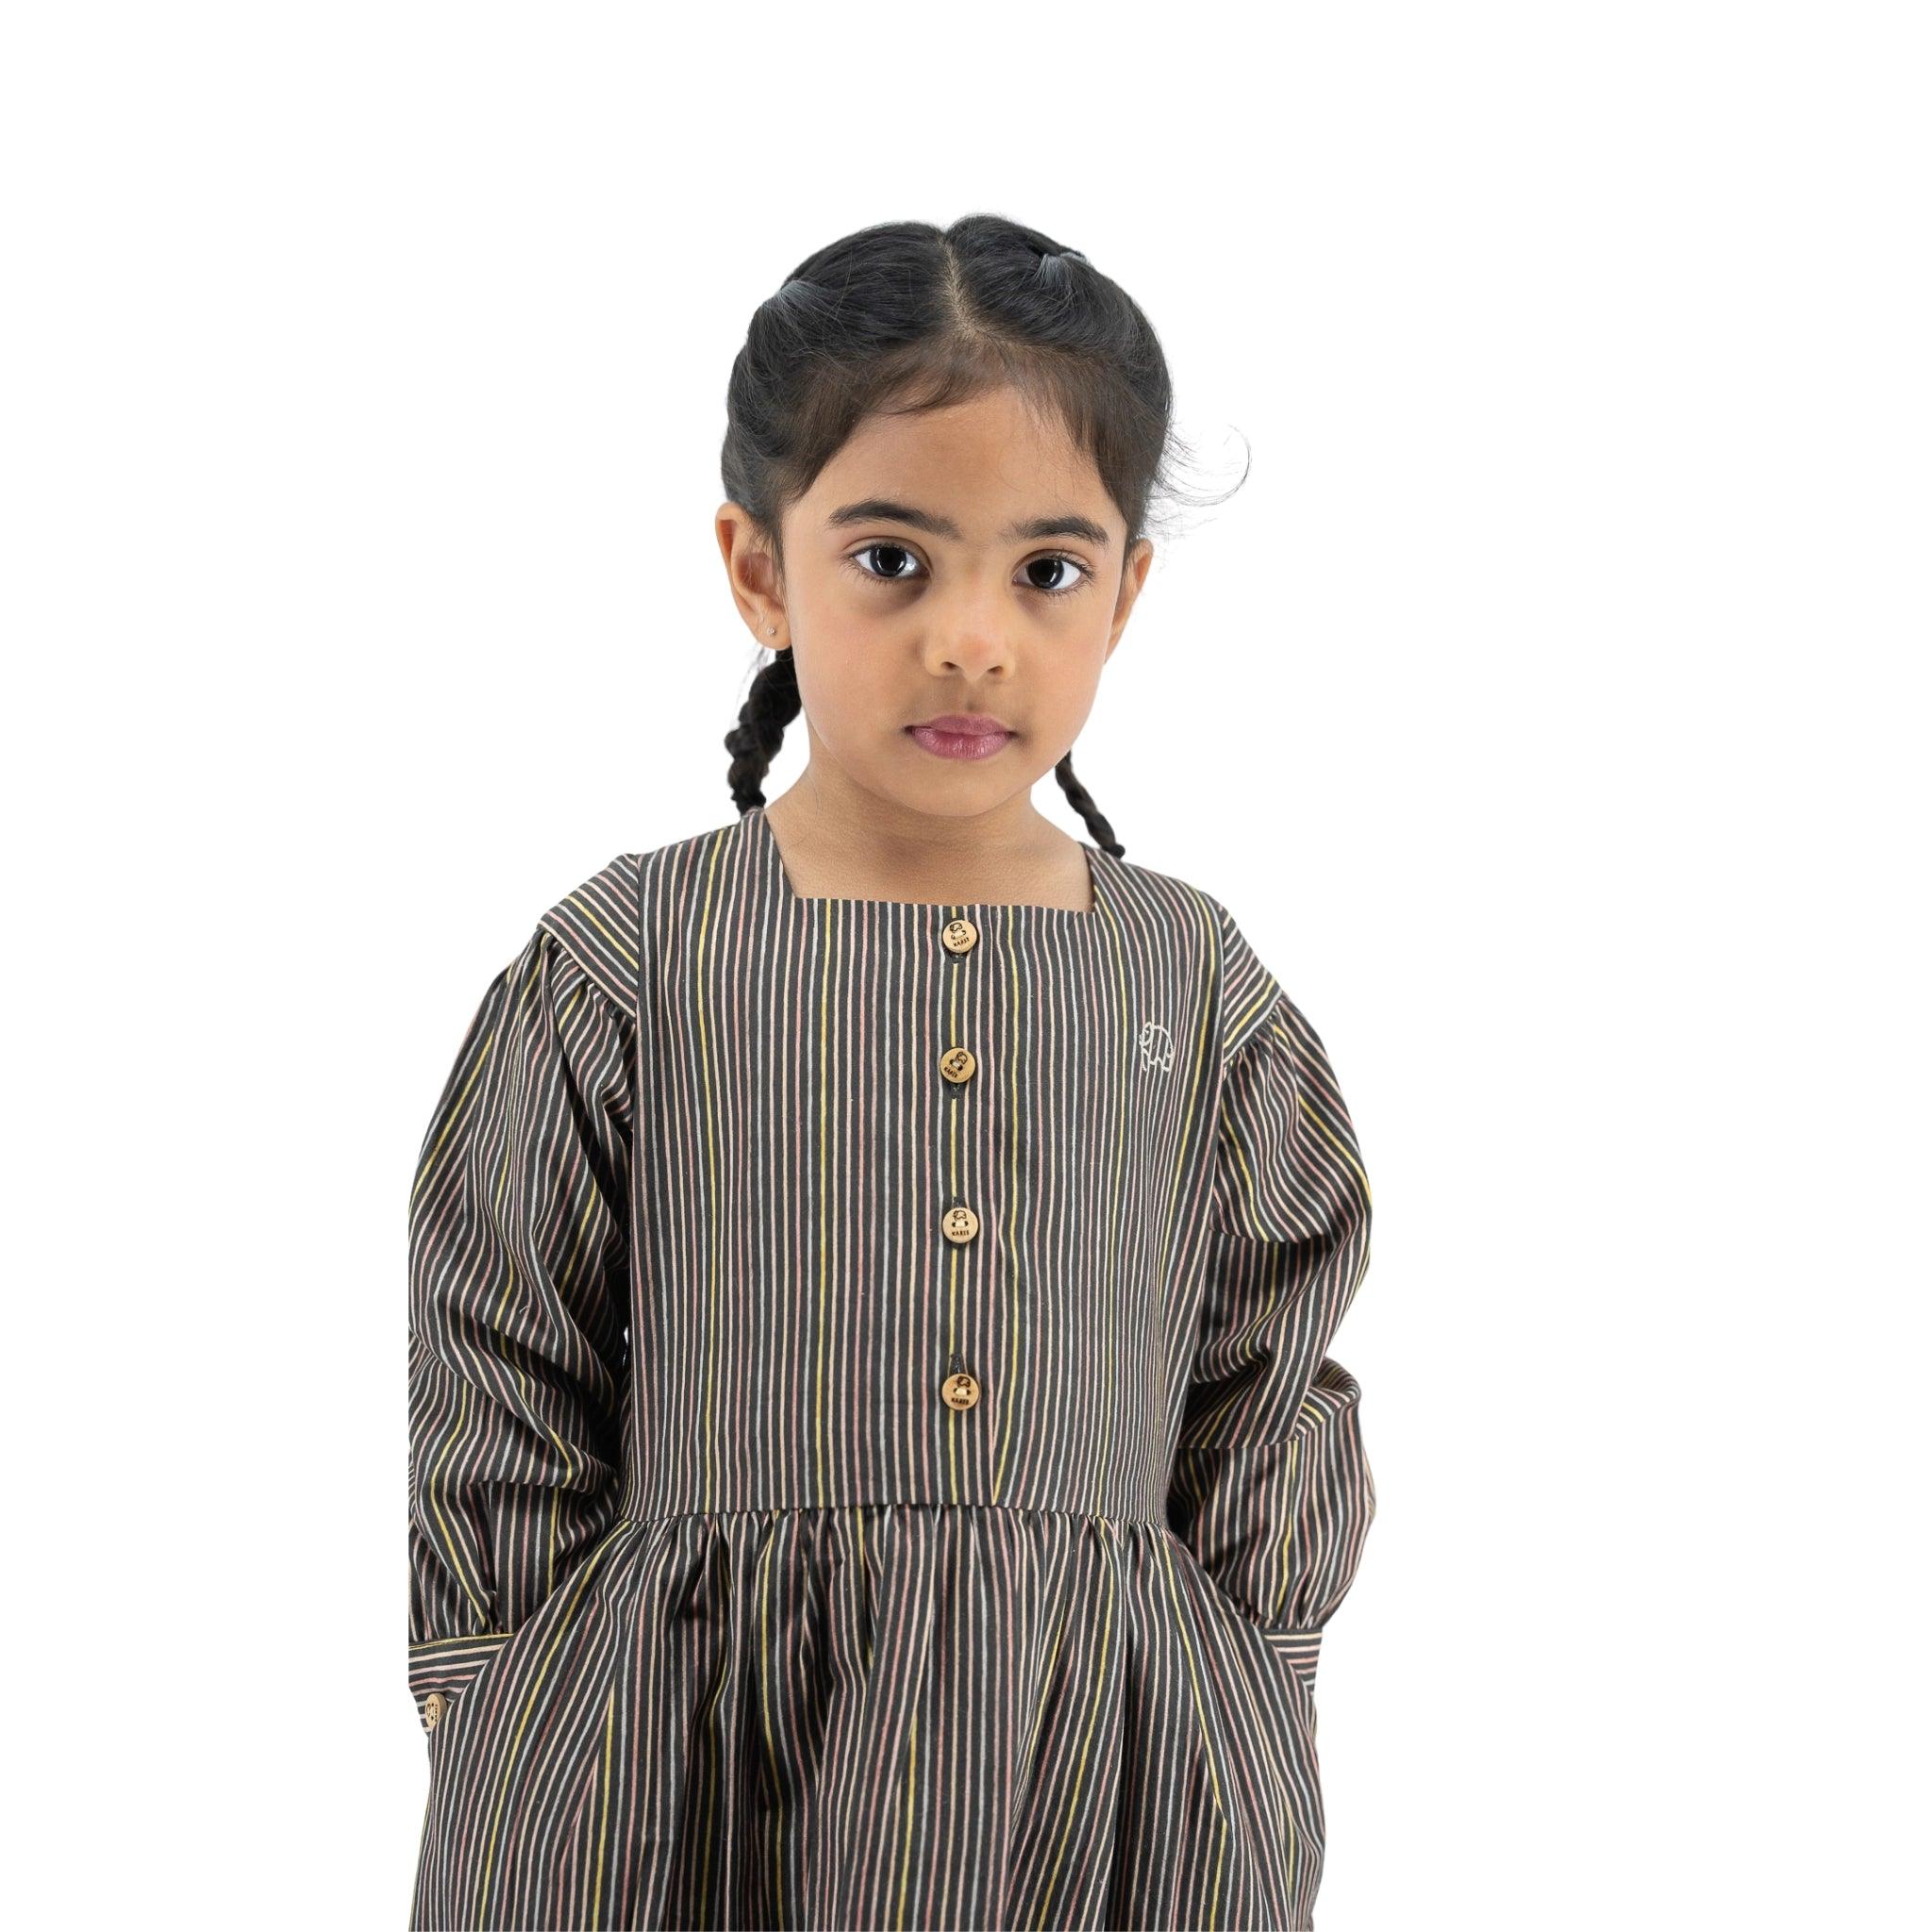 Young girl with braided hair wearing a Karee Black Striped Full sleeve Cotton Dress, standing against a white background, looking slightly to the side.